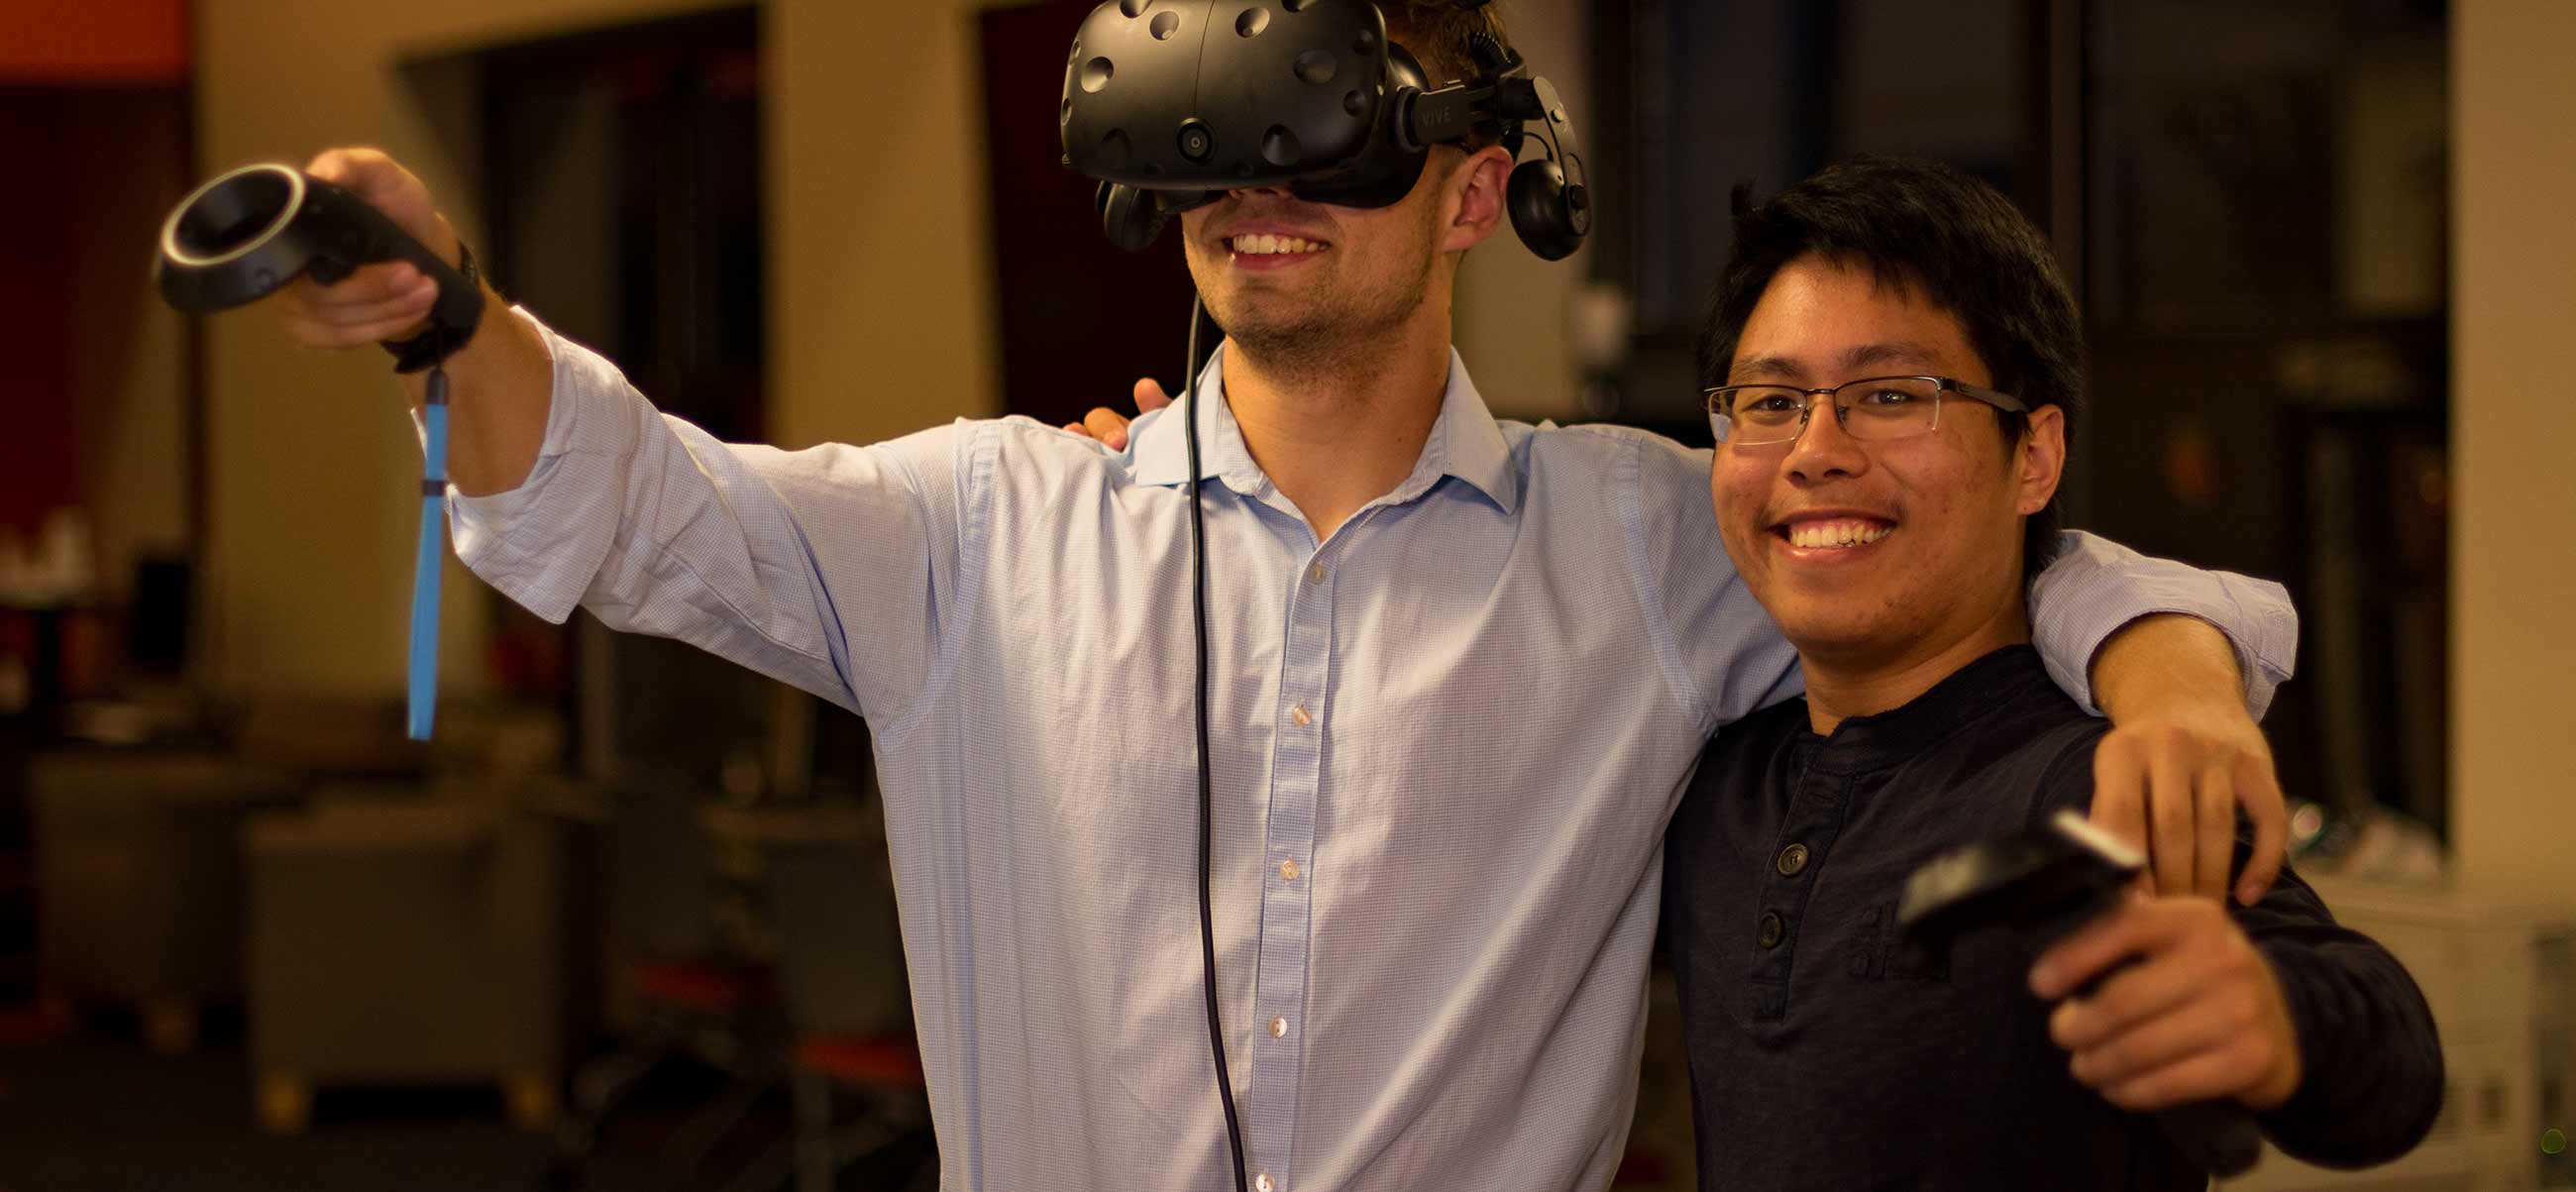 Computer science majors augment historic exploration through virtual reality projects